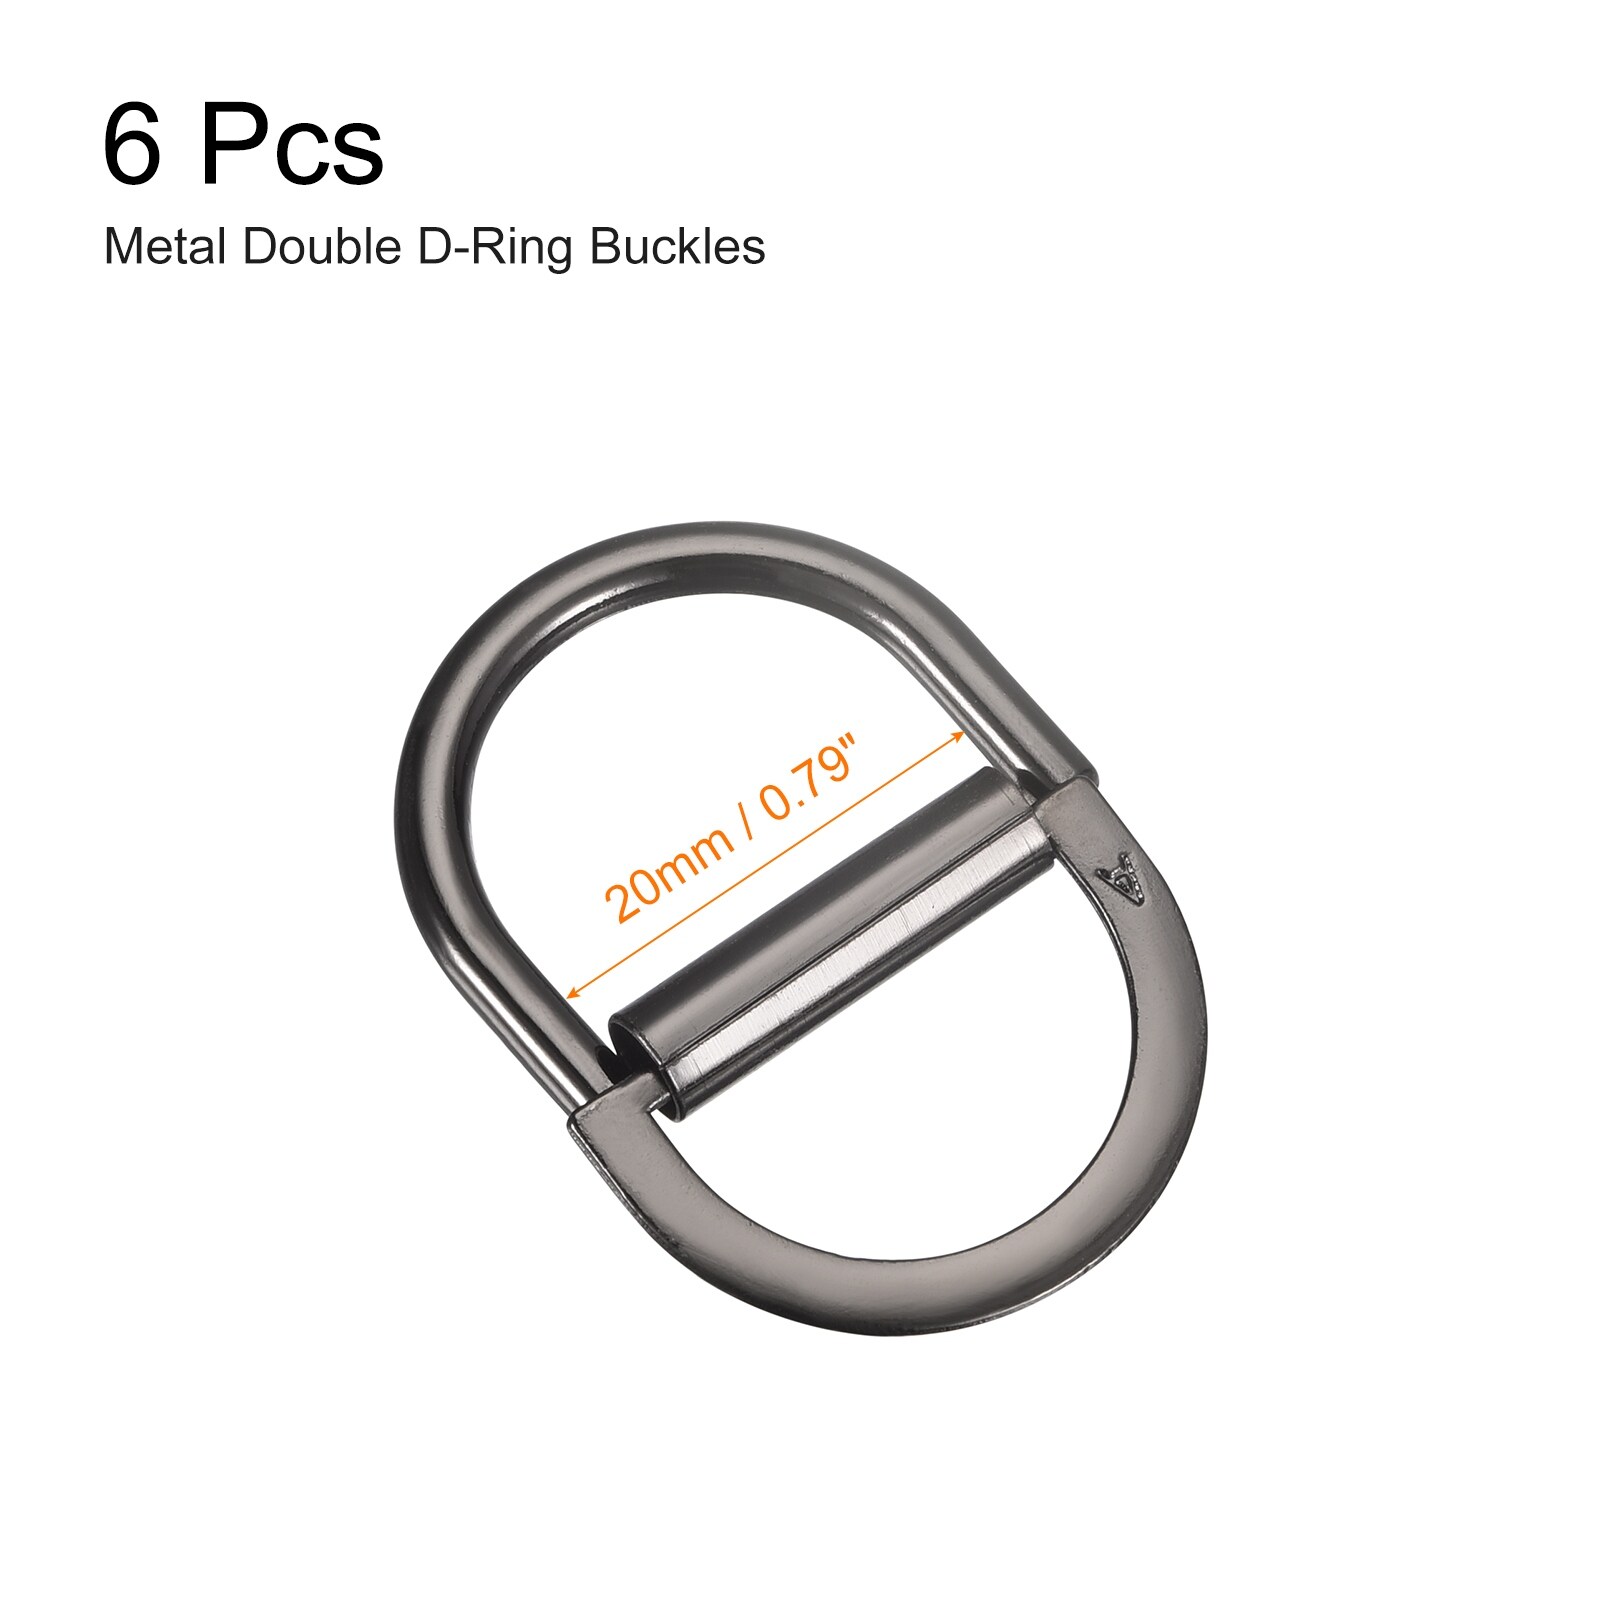 Double D-Ring Buckles, Metal Adjustable D Rings for Clothing Waistband  Dress Straps Bags Scarf